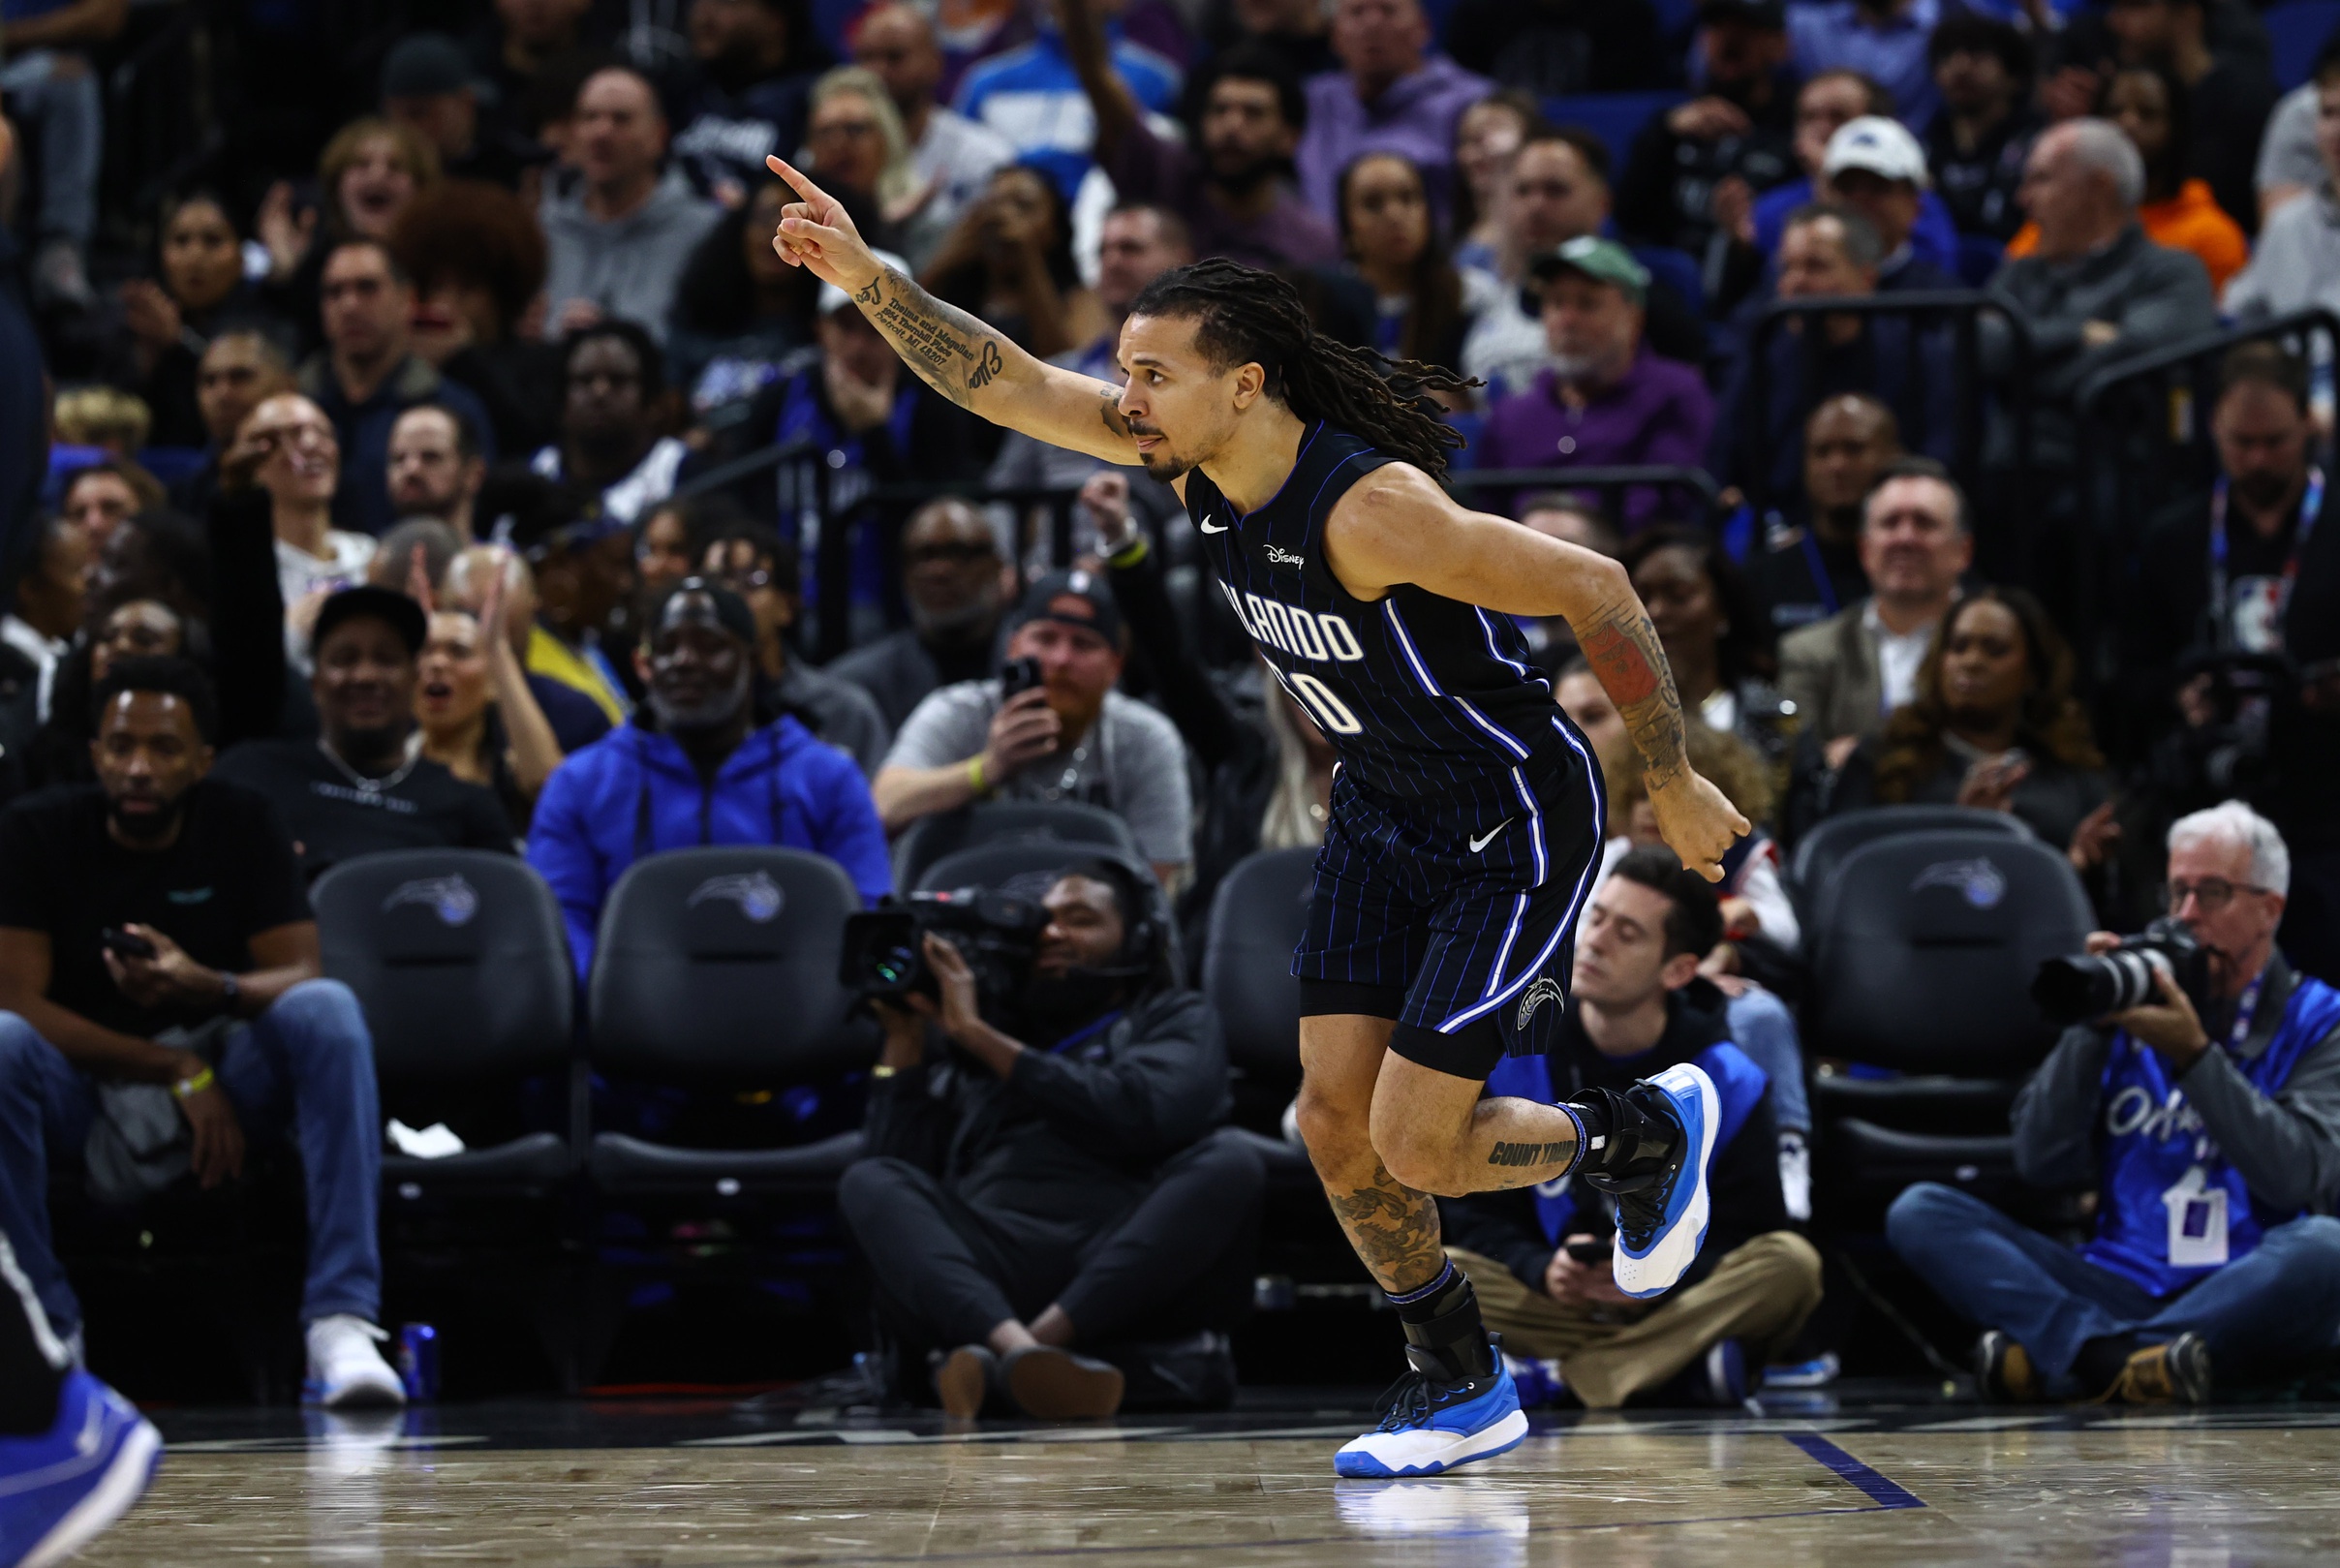 Orlando Magic guard Cole Anthony (50) celebrates after he makes a three-pointer against the Washington Wizards during the second half at Amway Center.